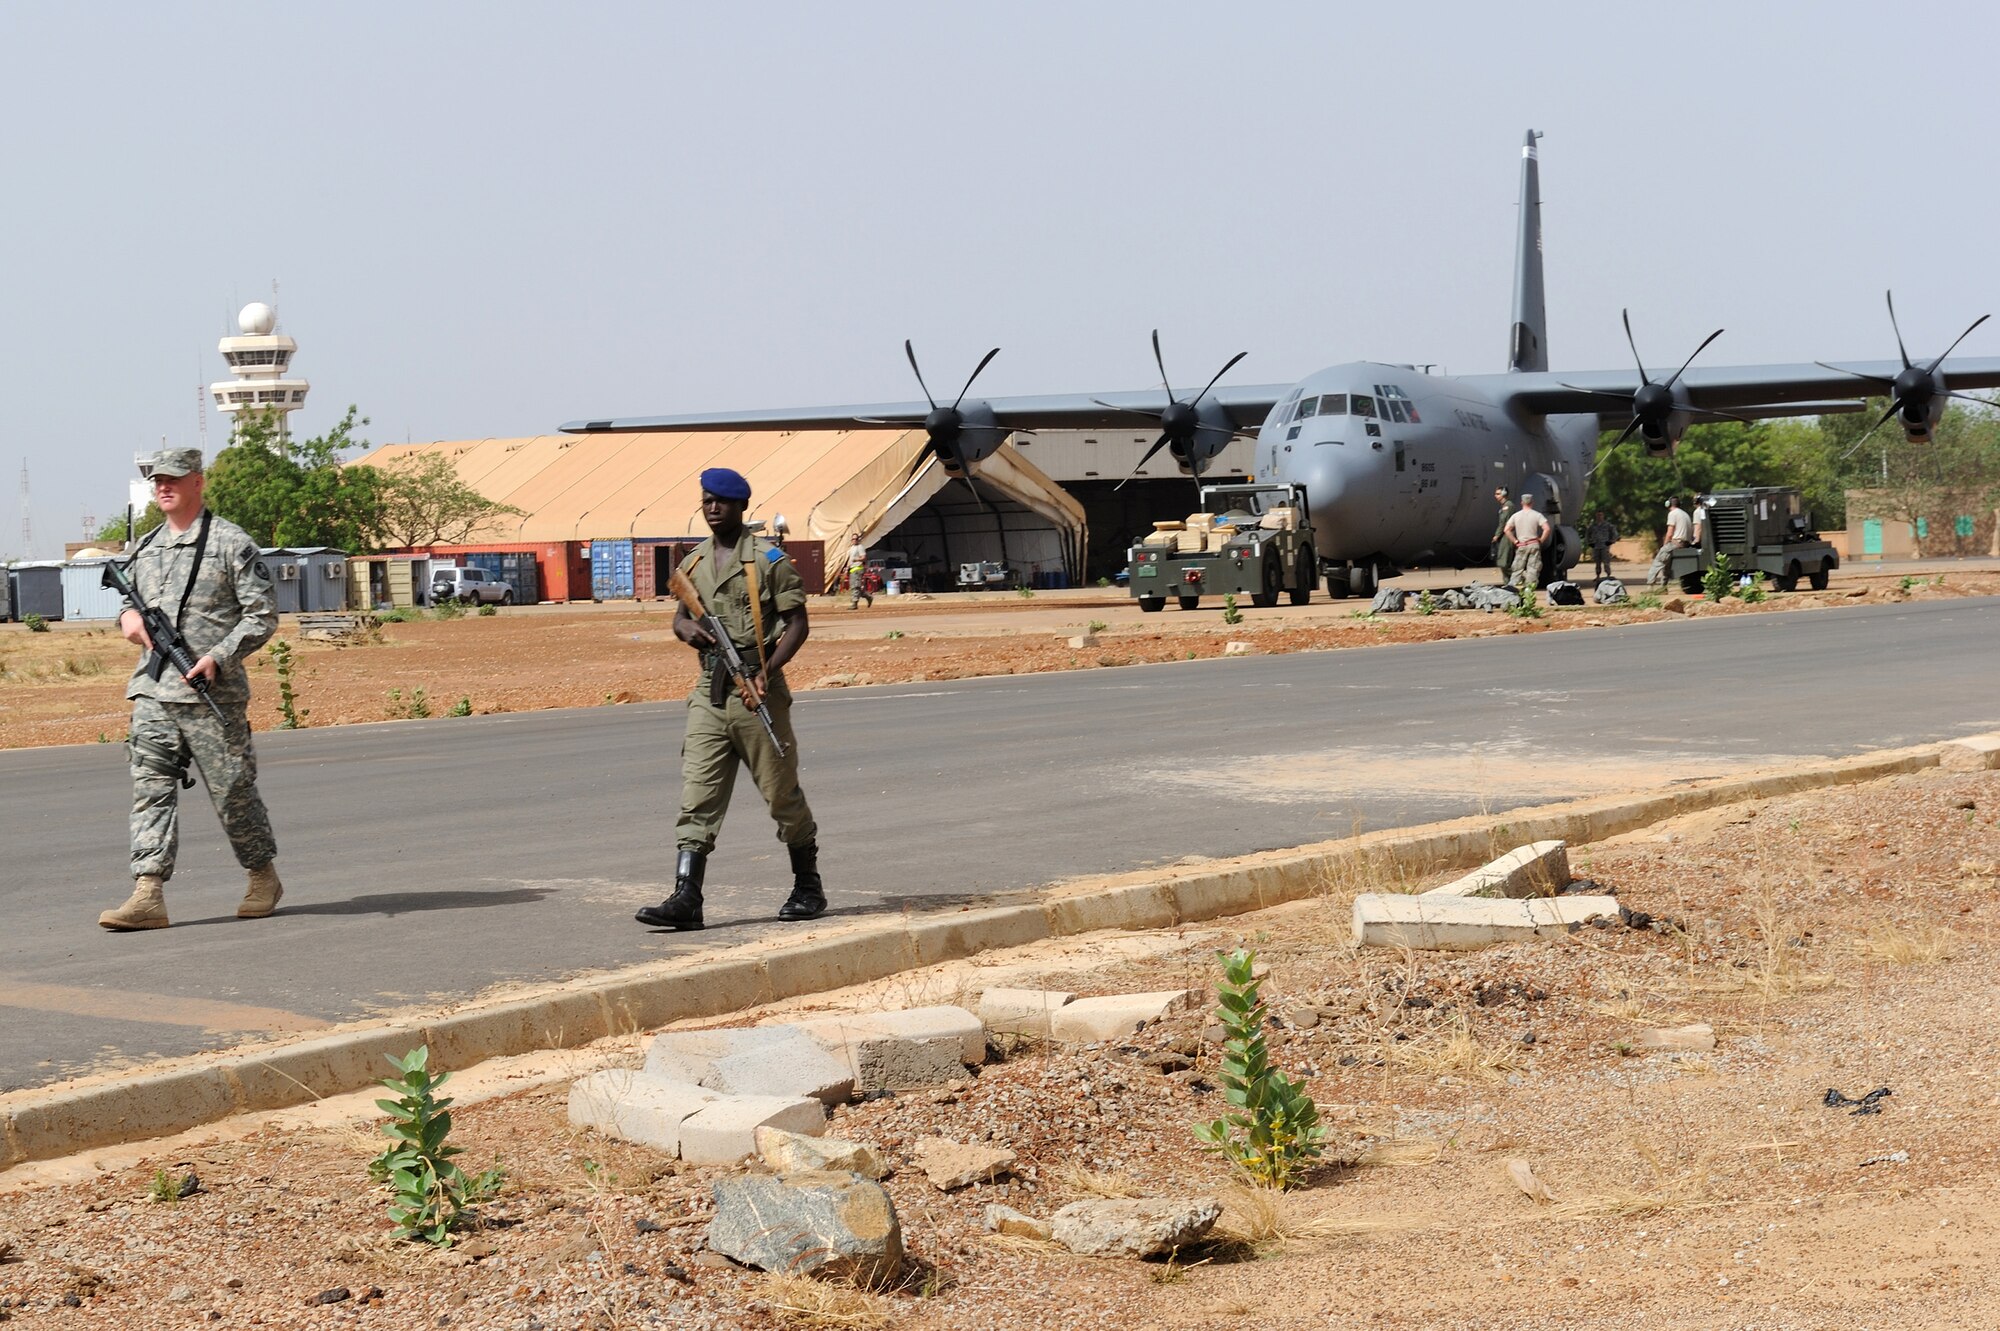 OUAGADOUGOU, Burkina Faso -- A joint U.S. Army and Burkinabe security patrol provides airfield security May 1 while a C-130J Super Hercules from the 86th Airlift Wing, Ramstein Air Base, Germany, prepares for departure with Burkinabe Army personnel and equipment onboard for deployment to Mali in support of Exercise Flintlock 10.  Flintlock 10 is an exercise focused on military interoperability and capacity-building and is part of a U.S. Africa Command sponsored annual exercise program with partner nations in Northern and Western Africa.  Approximately 1,200 African, European and U.S. participants from 14 nations are involved in military interoperability activities across the Trans-Saharan region during this event.  (U.S. Air Force photo by Master Sgt. Jeremiah Erickson)